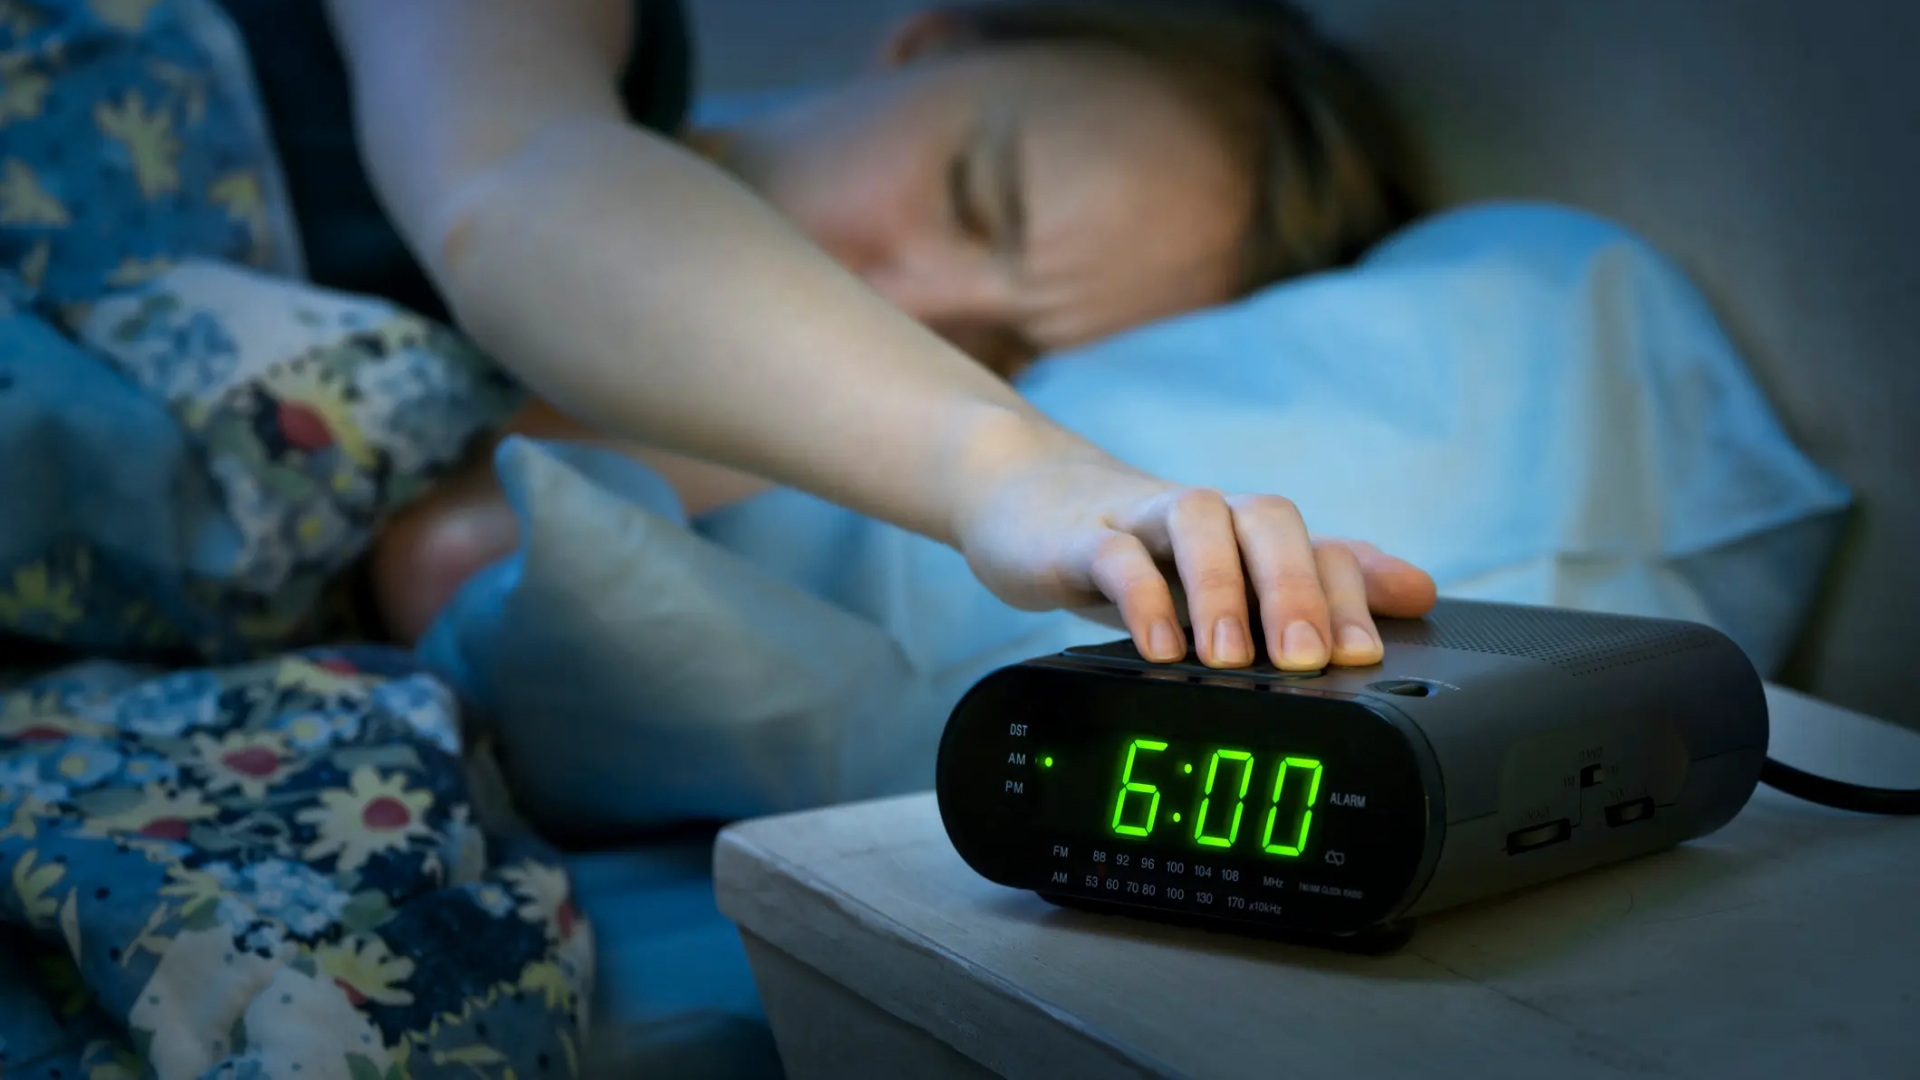 In a poll, only 26% of Americans claimed to obtain at least 8 hours of sleep each night.